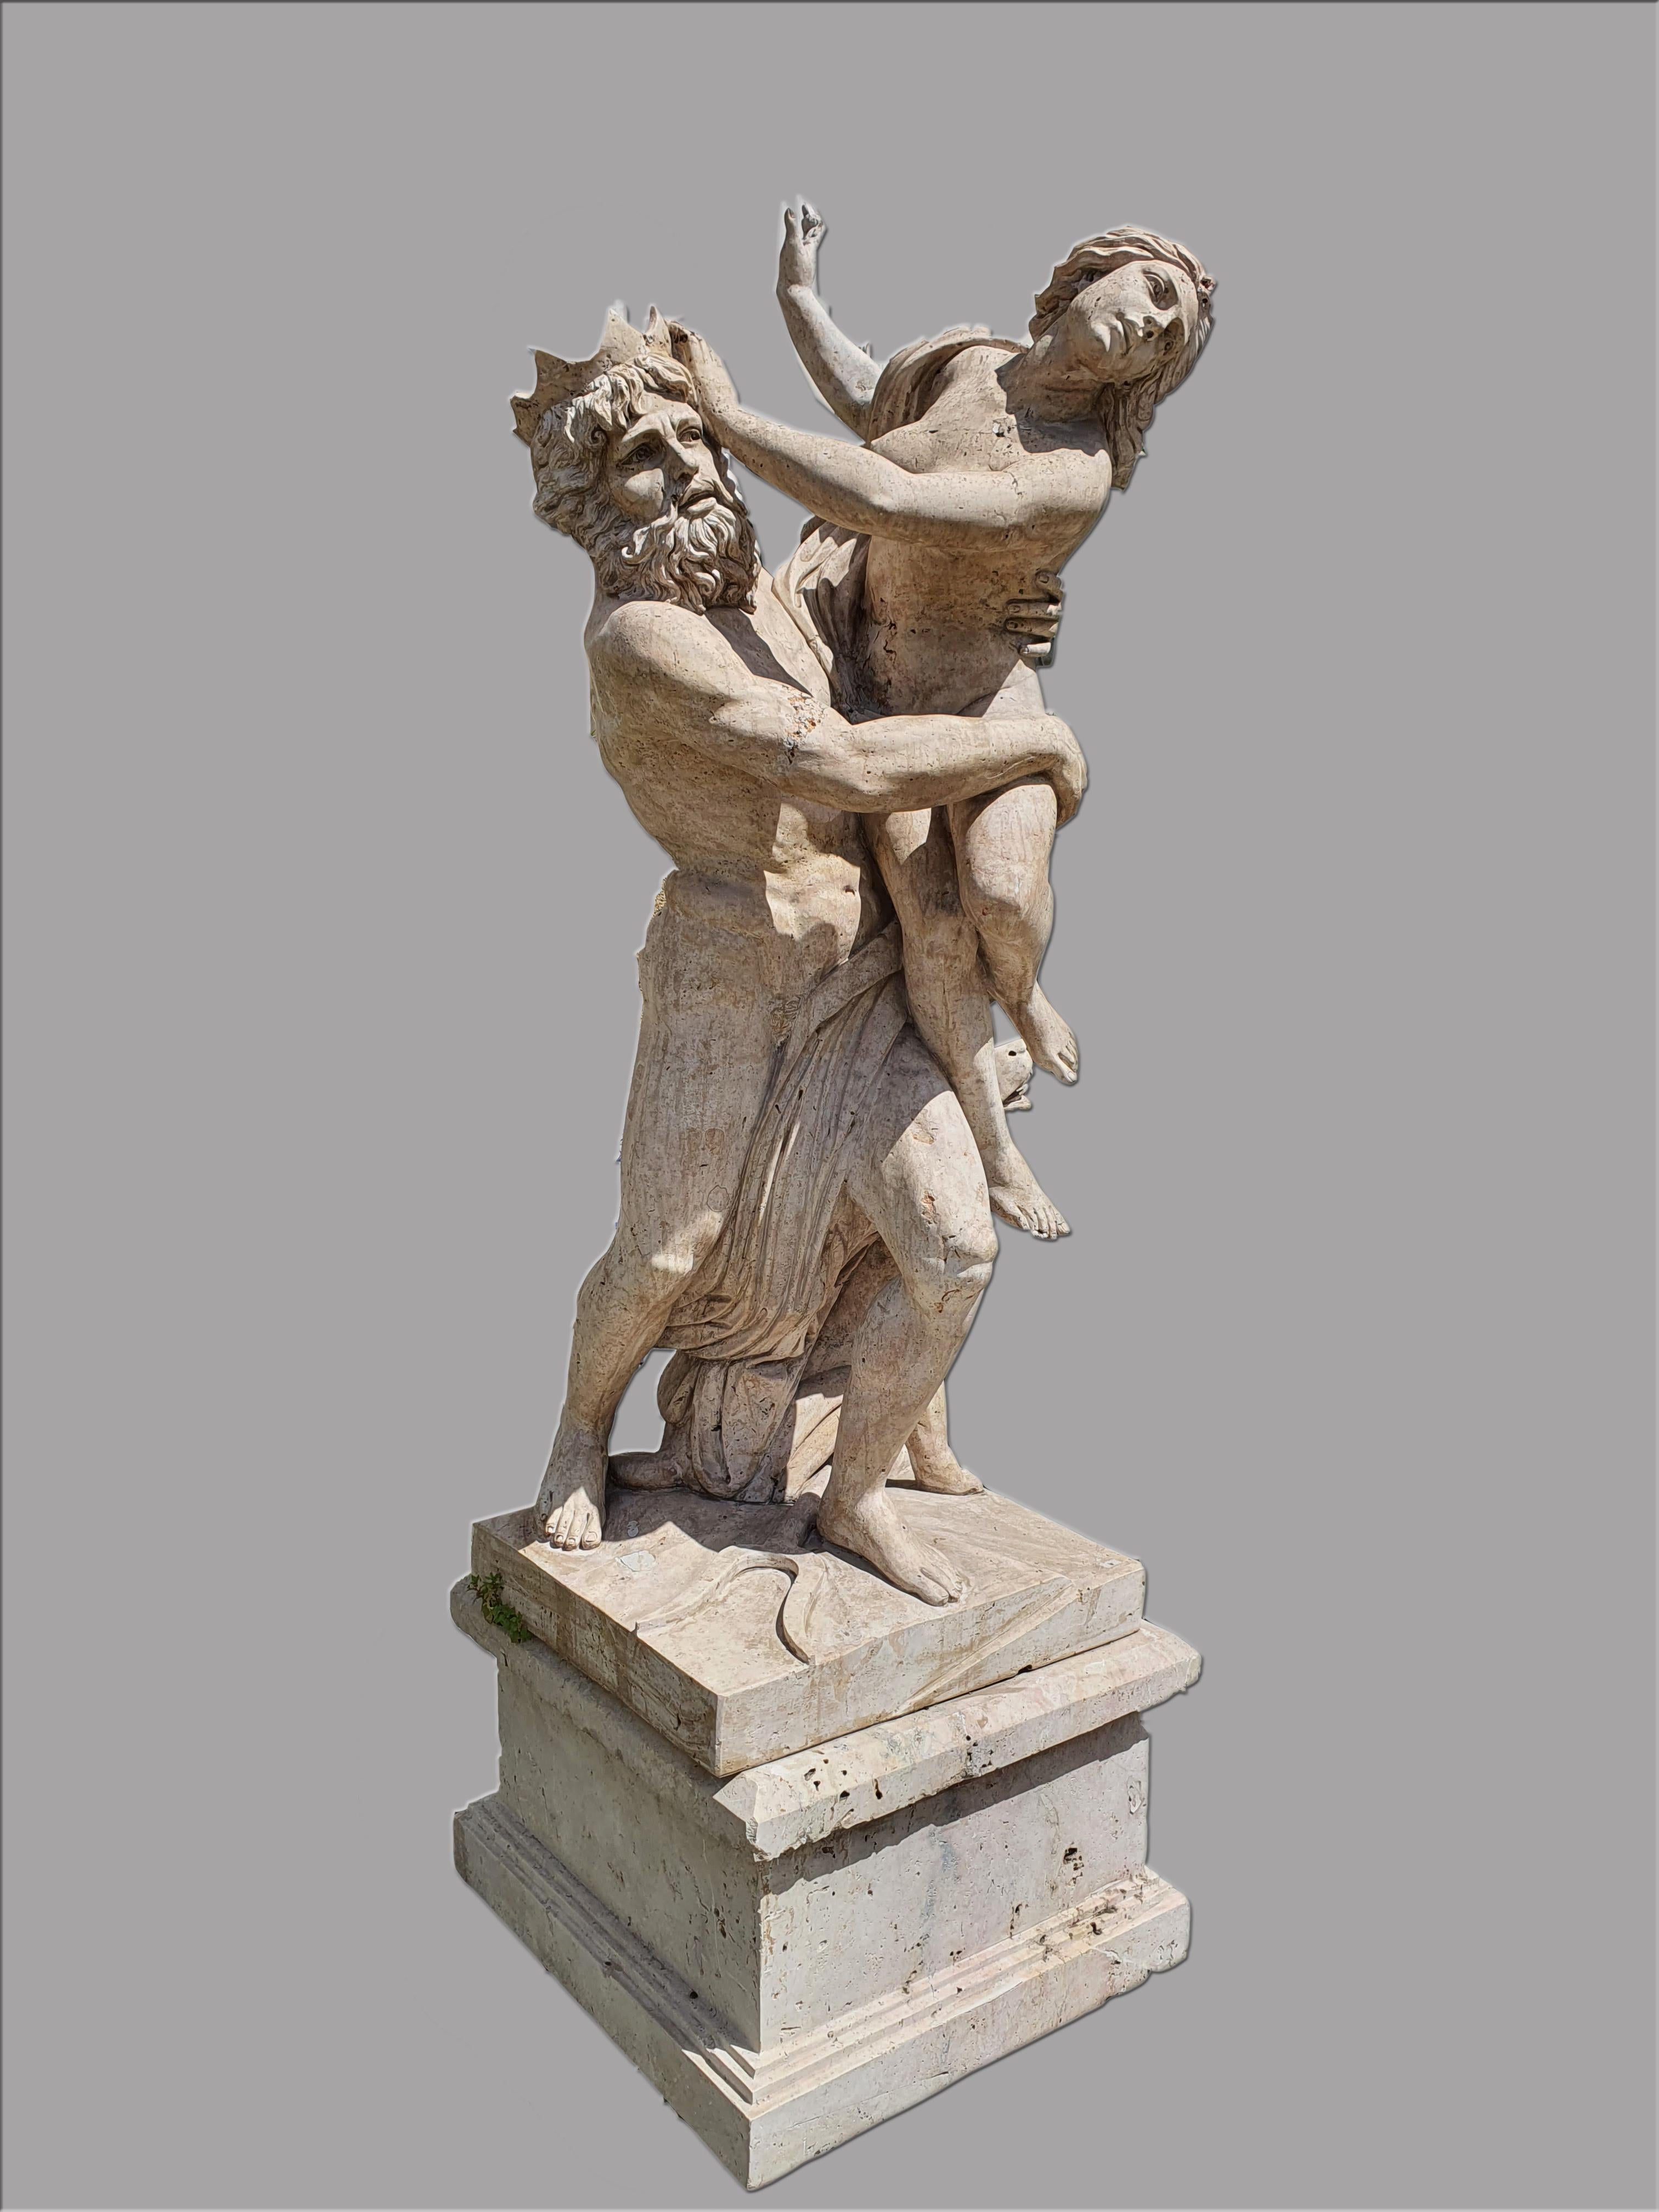 Large sculpture made of Roman travertine, finely carved in every detail. The sculpture represents the famous Rape of Proserpina, work of art known all over the world.